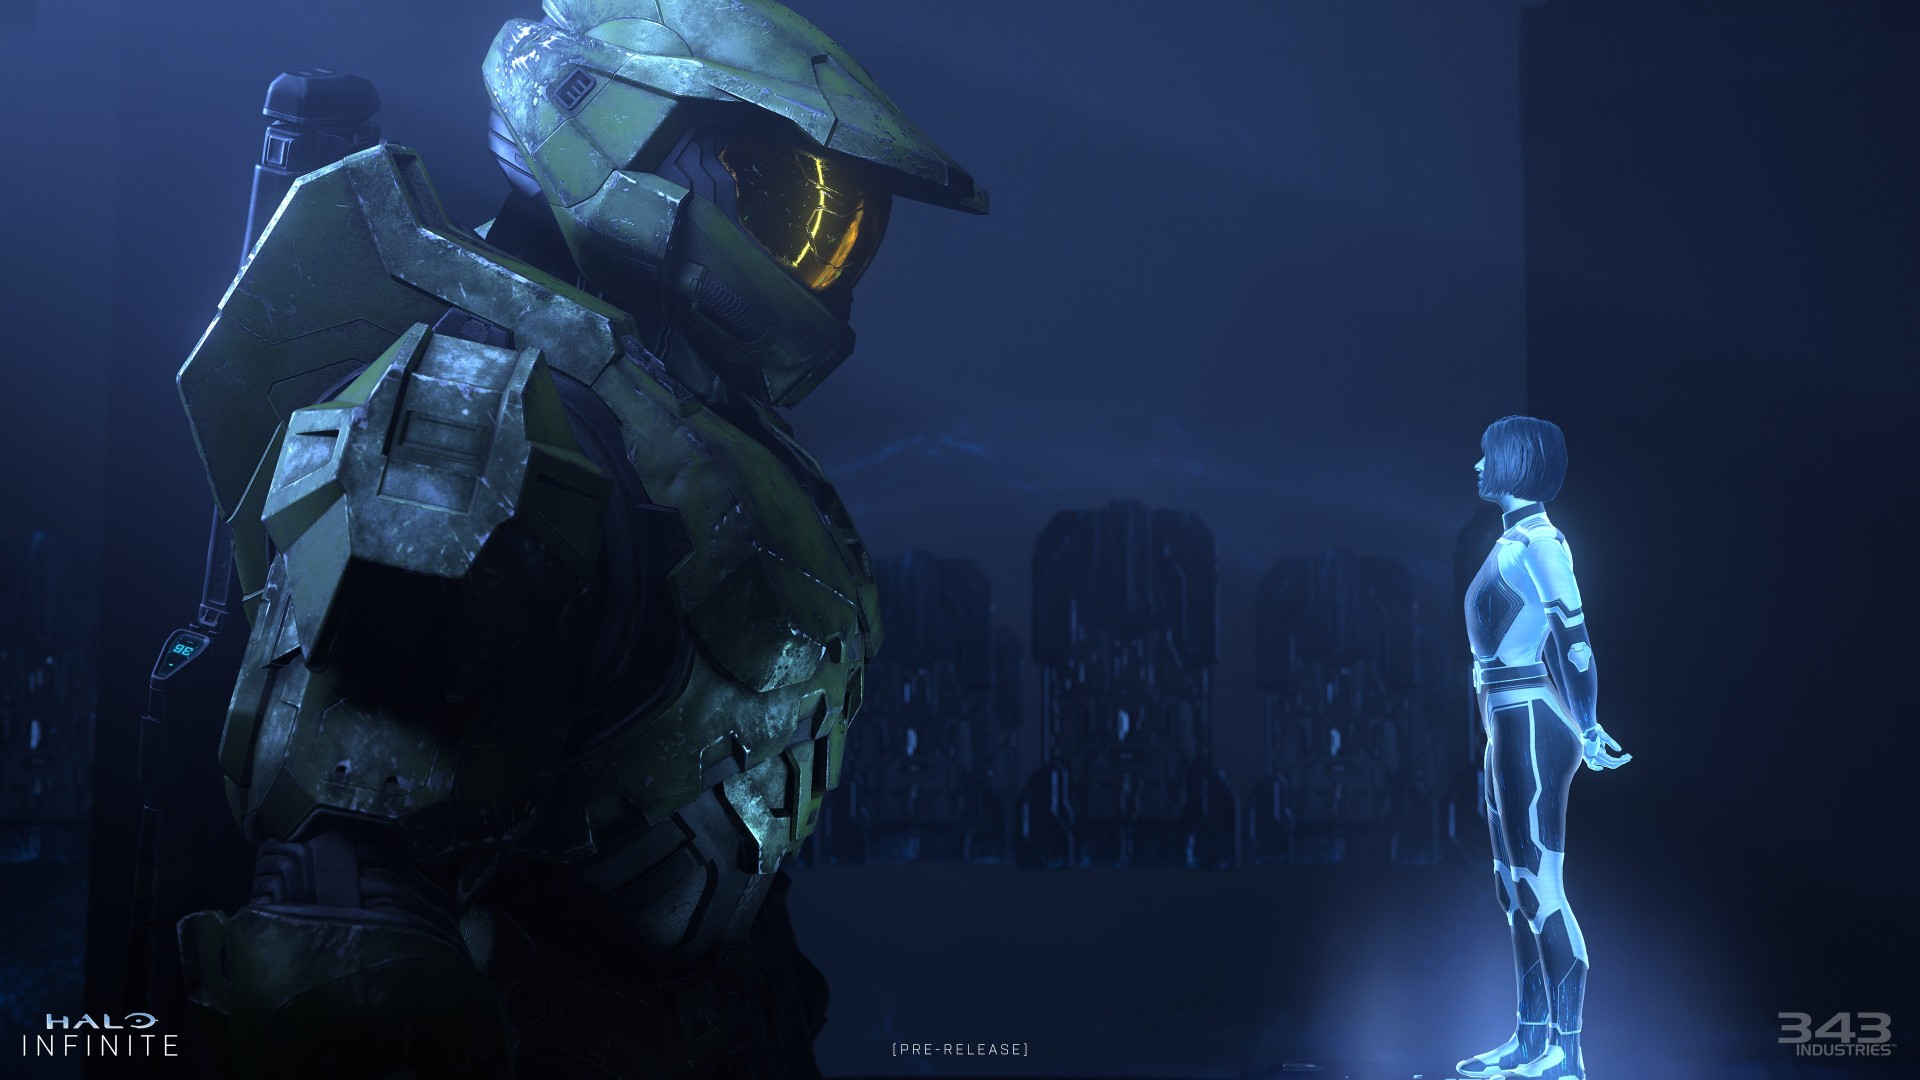 Halo Infinite (Campaign) - December 8 - Optimized for Xbox Series X |  S - Xbox Game Pass